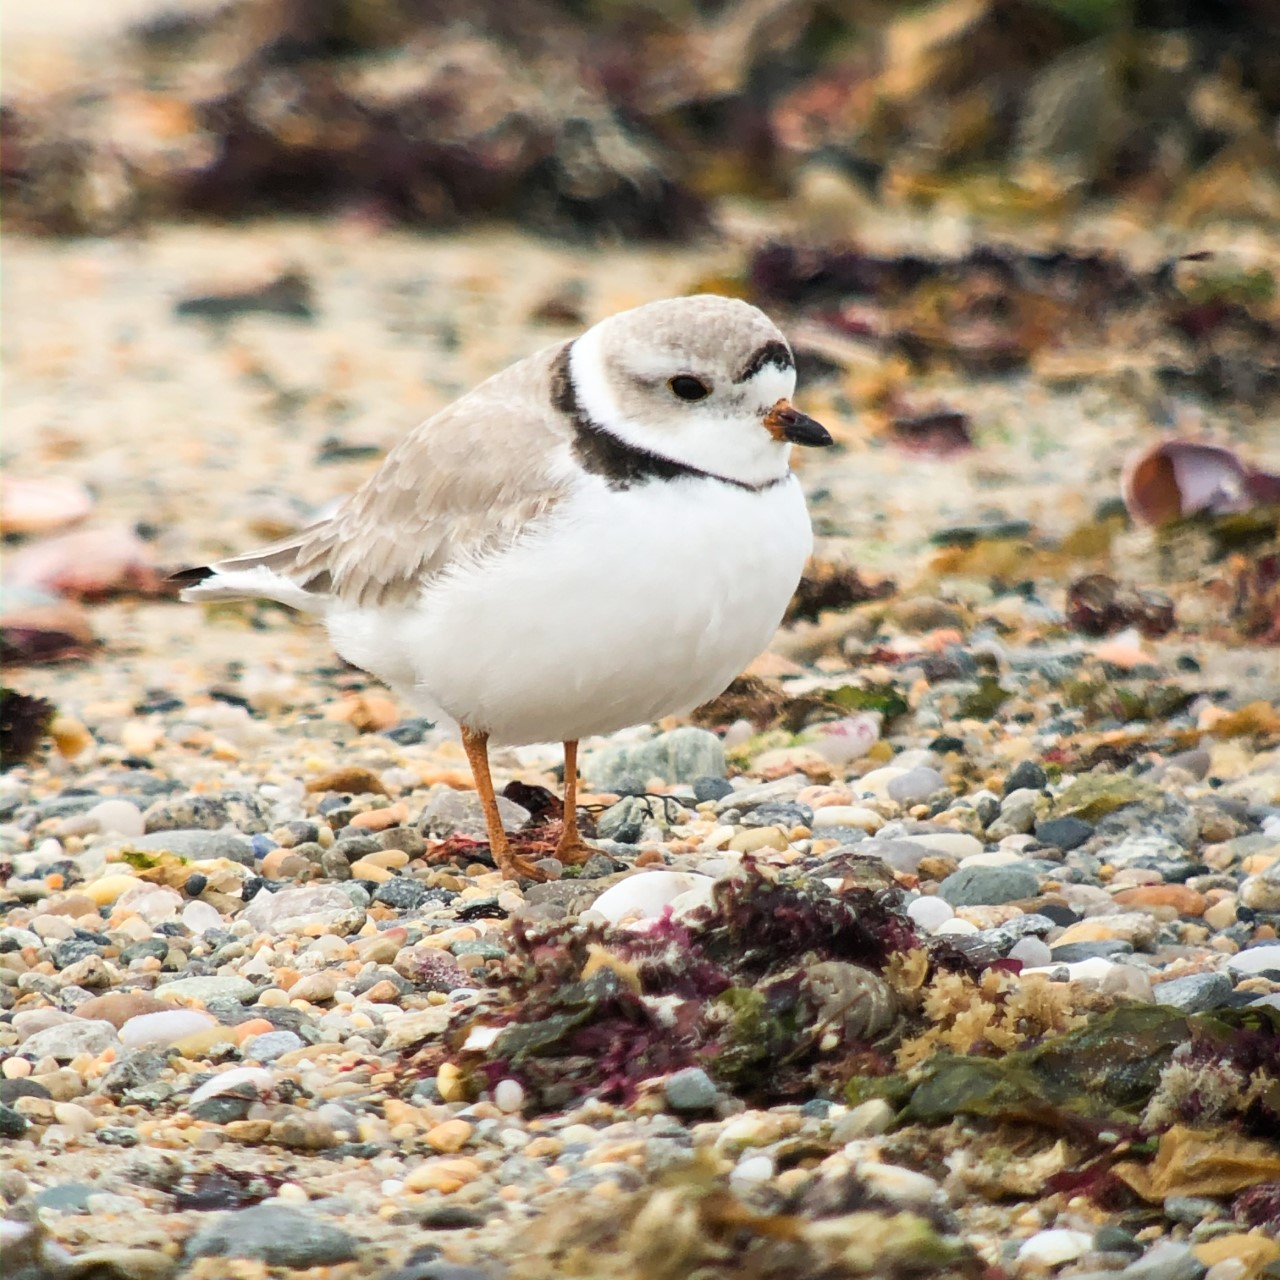 Image of a piping plover on a beach